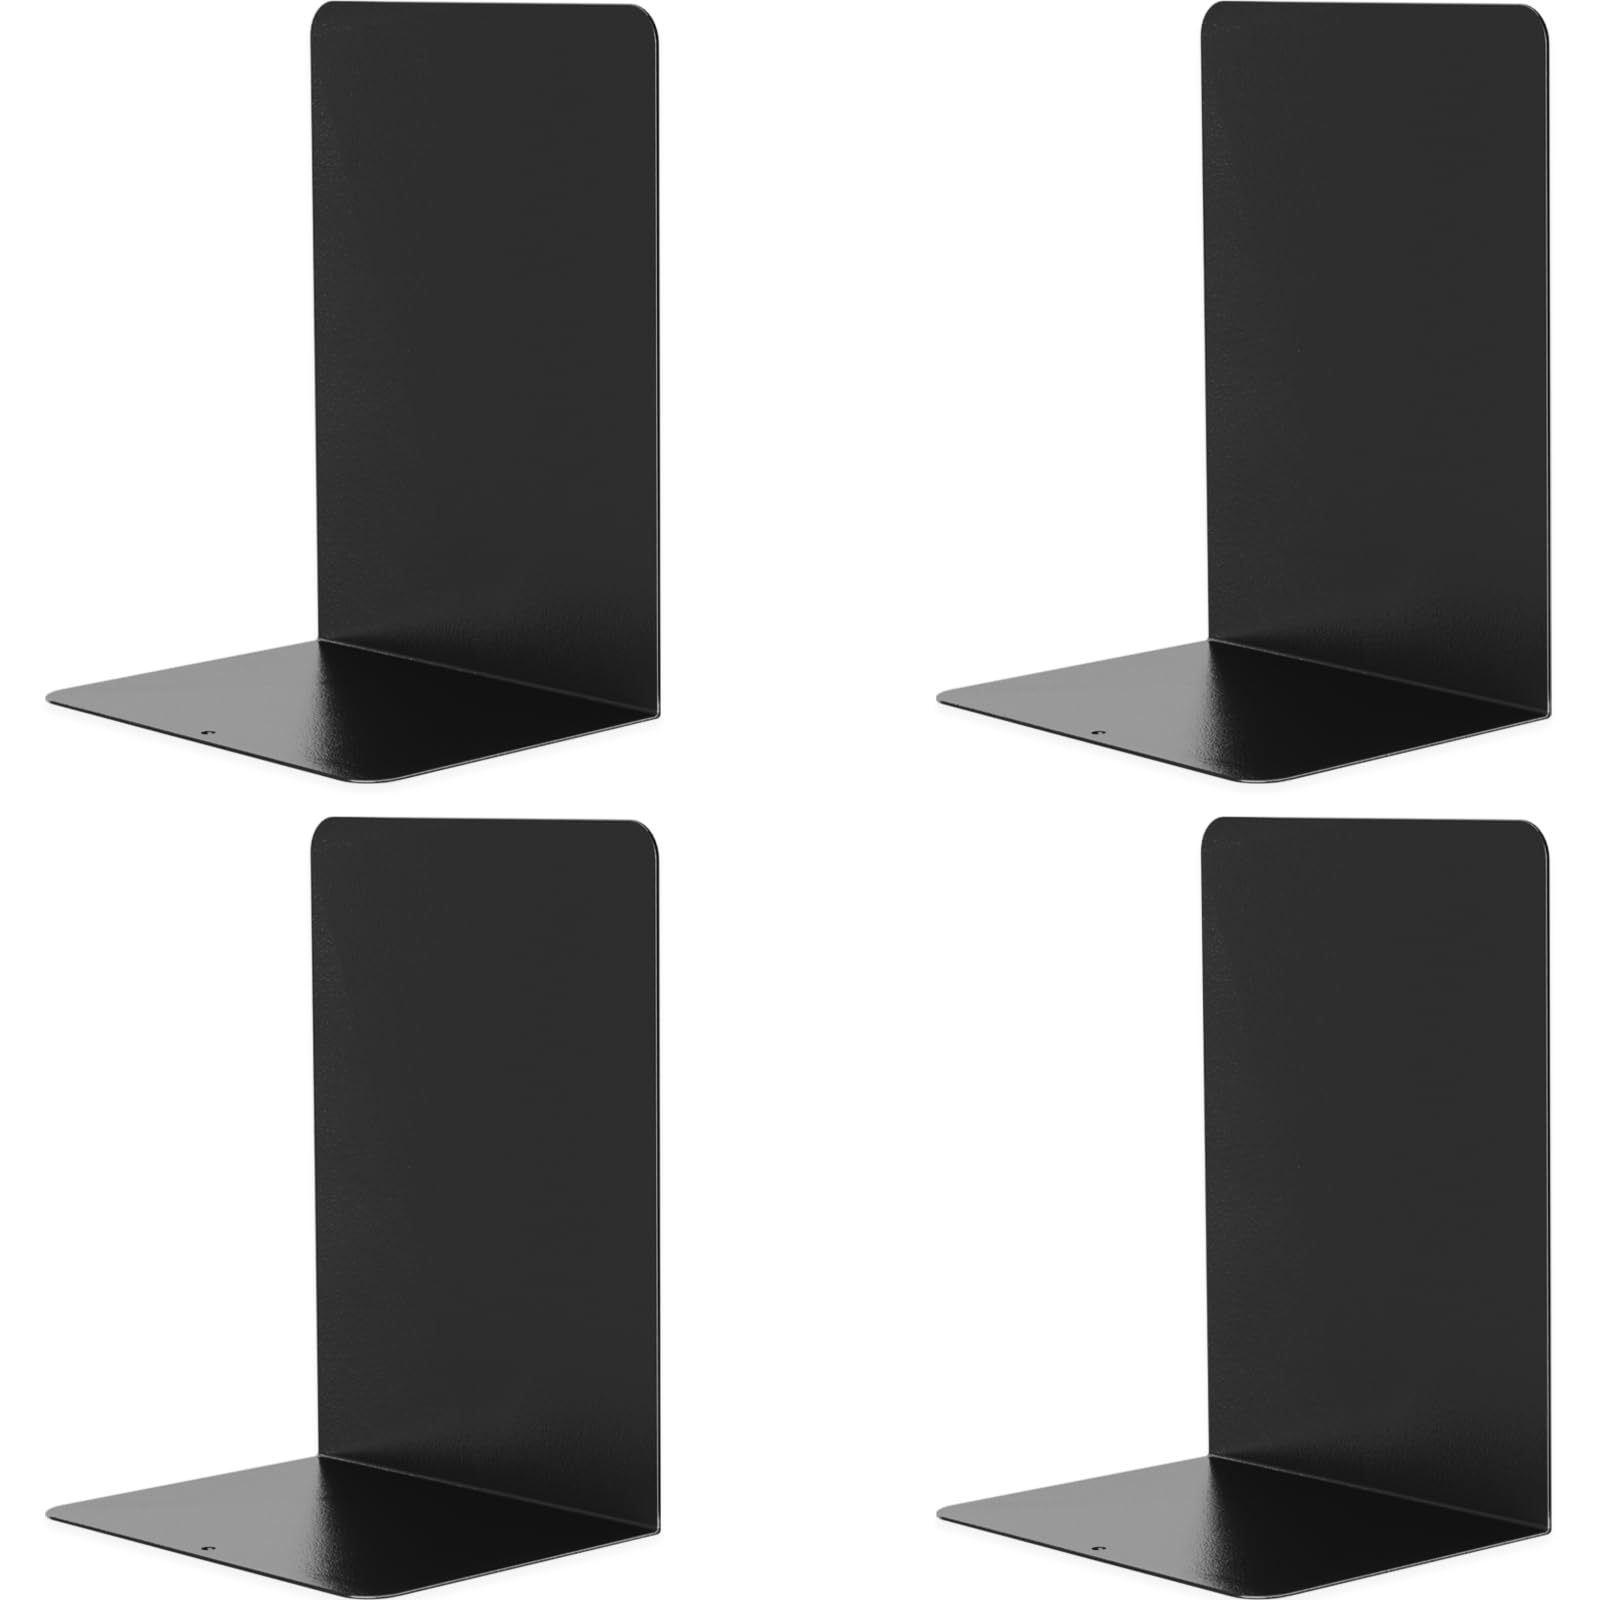 VONDERSO Metal Bookends Black, 2 Pairs Decorative Metal Book End Supports for Shelves Gauge Metal Book Divider Stopper Holders w